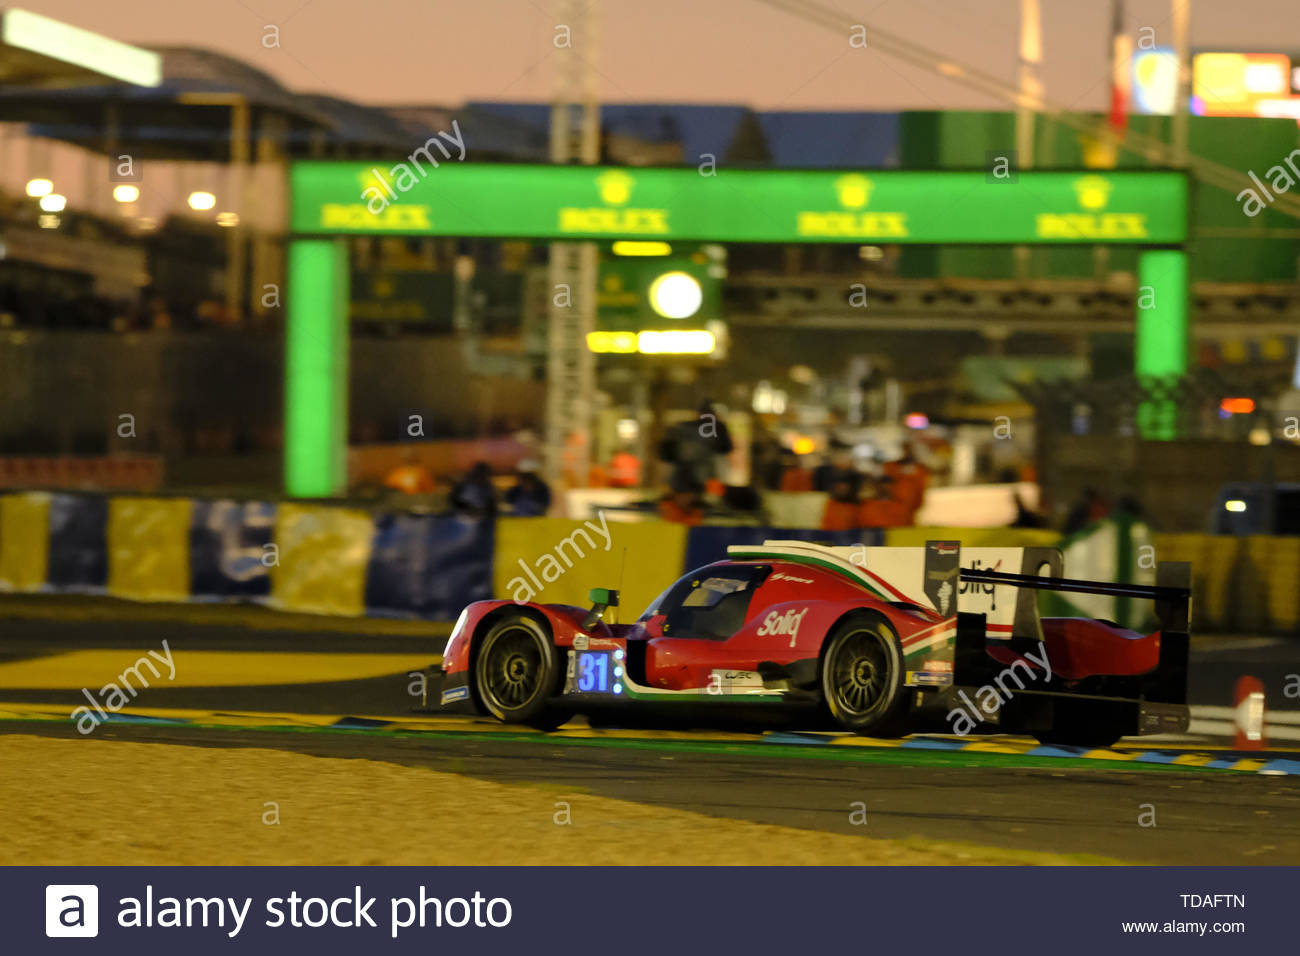 le mans sarthe france 13th june 2019 dragonspeed oreca 07 gibson rider roberto gonzalez mex in action during the 87th edition of the 24 hours of le mans the last round of the fia world endurance championship at the sarthe circuit at le mans france credit pierre steveninzuma wirealamy live news TDAFTN